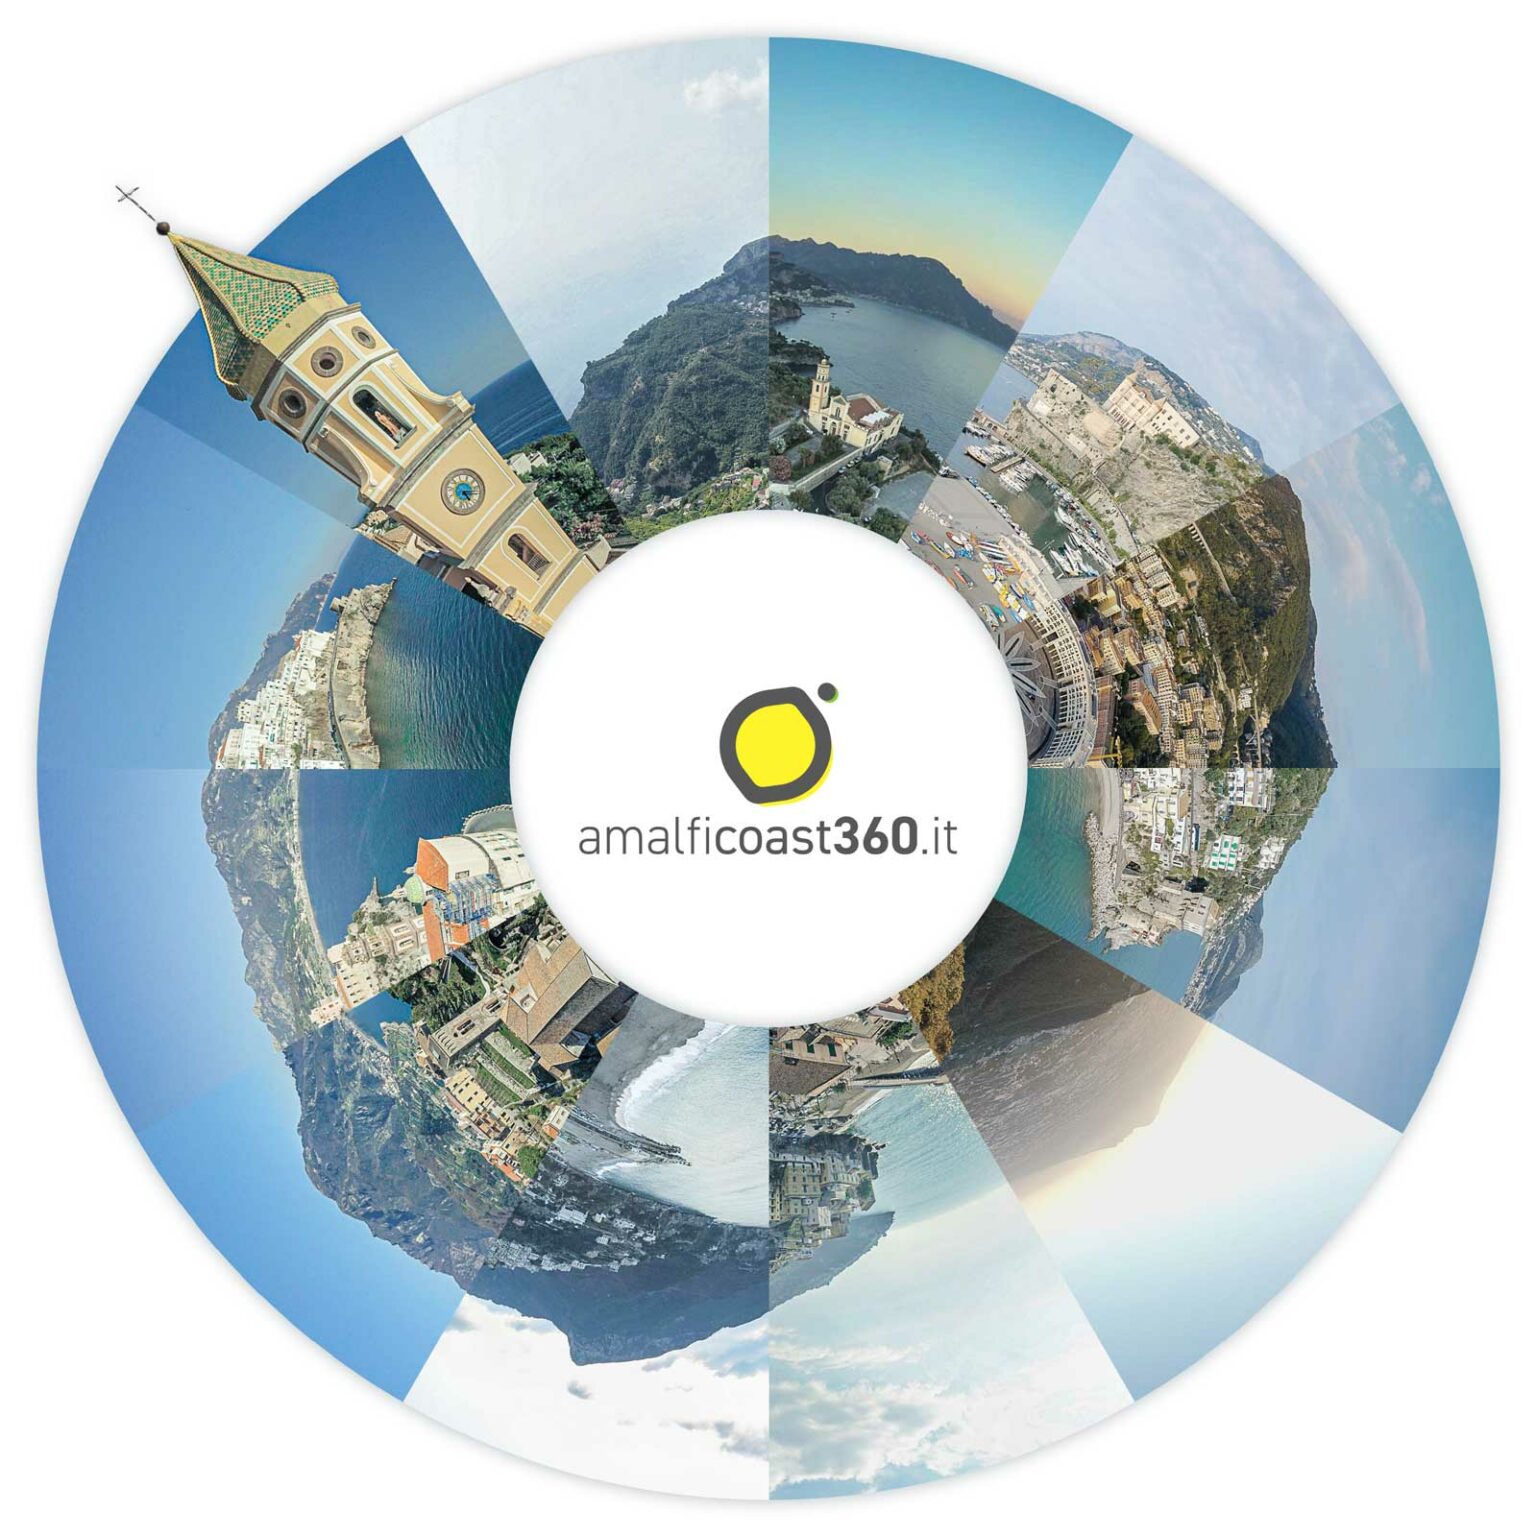 Amalfi Coast 360 - Little planet aerial spherical graphic cover